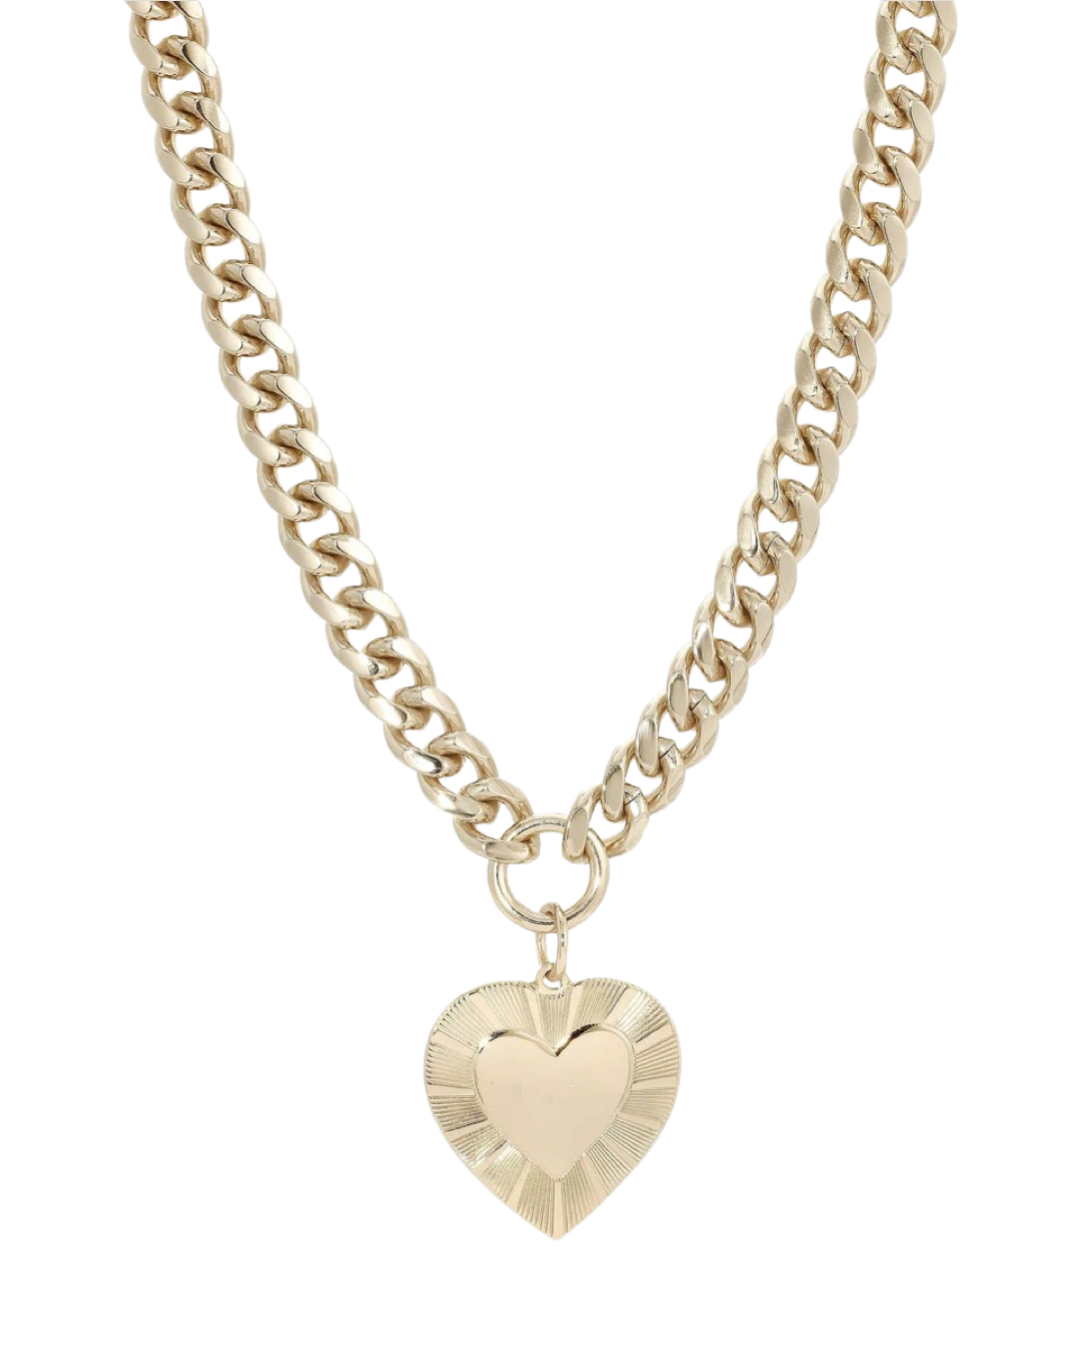 Curb Chain and Heart Necklace